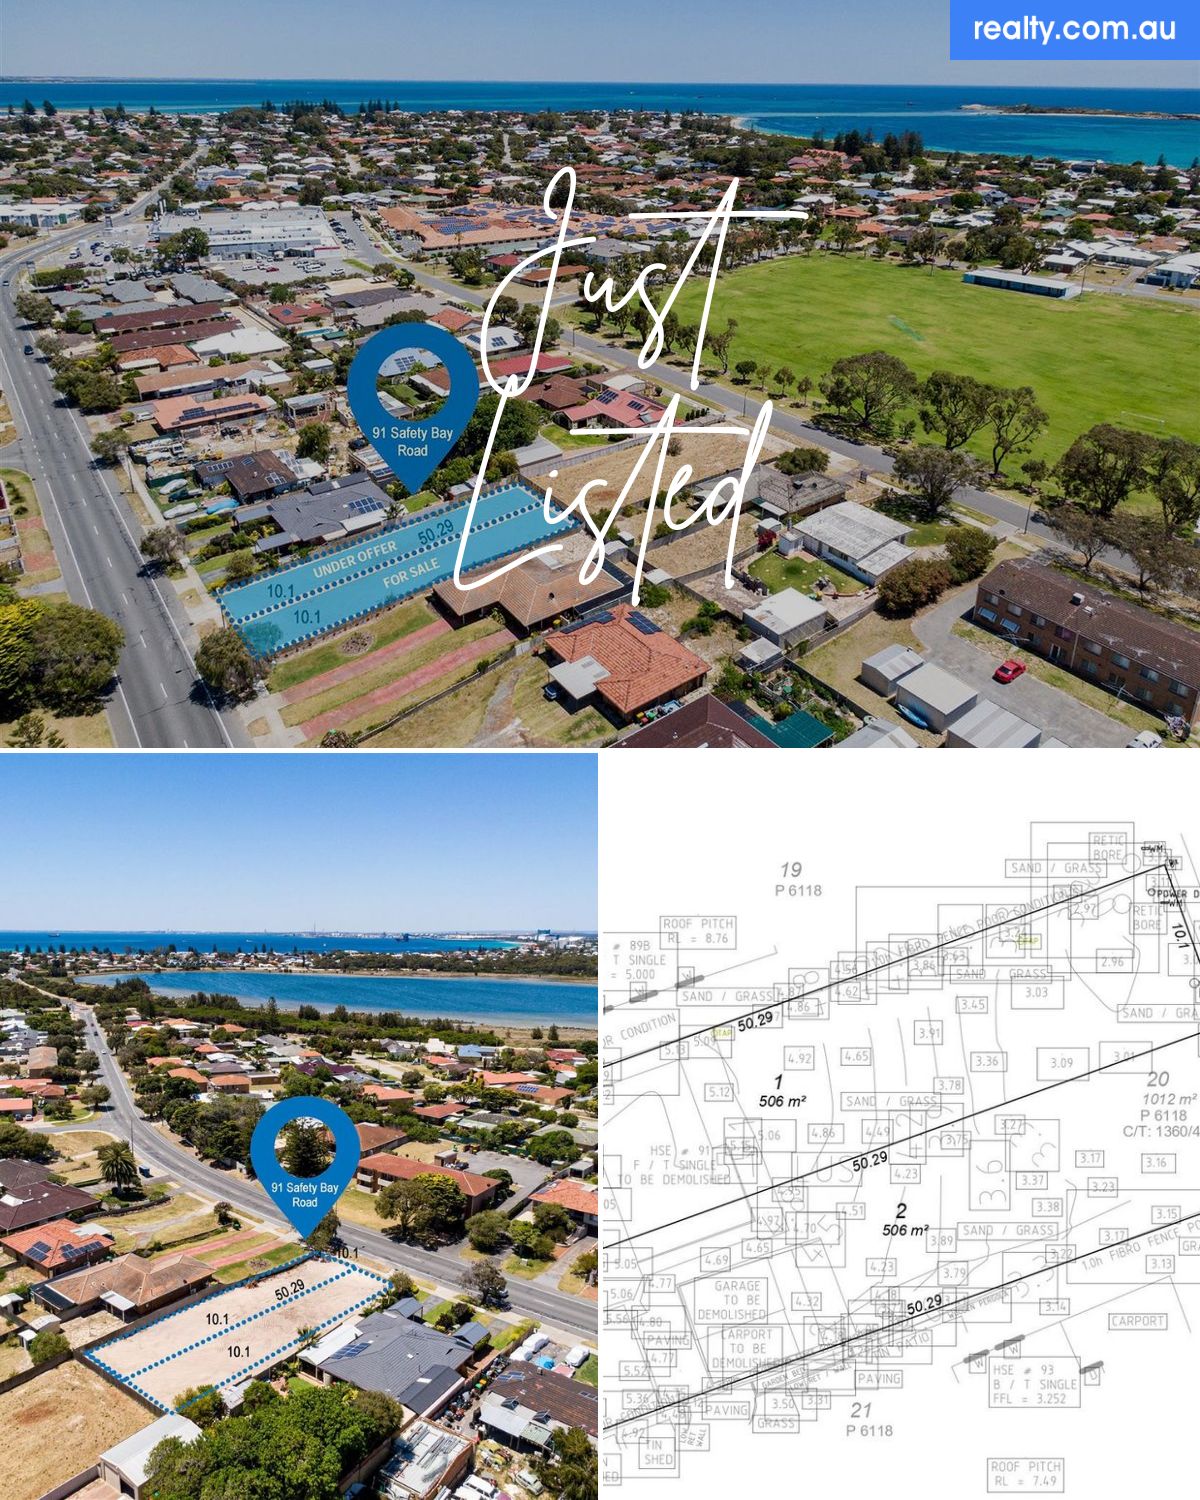 Proposed Lot 1/91 Safety Bay Road, Shoalwater, WA 6169 | Realty.com.au